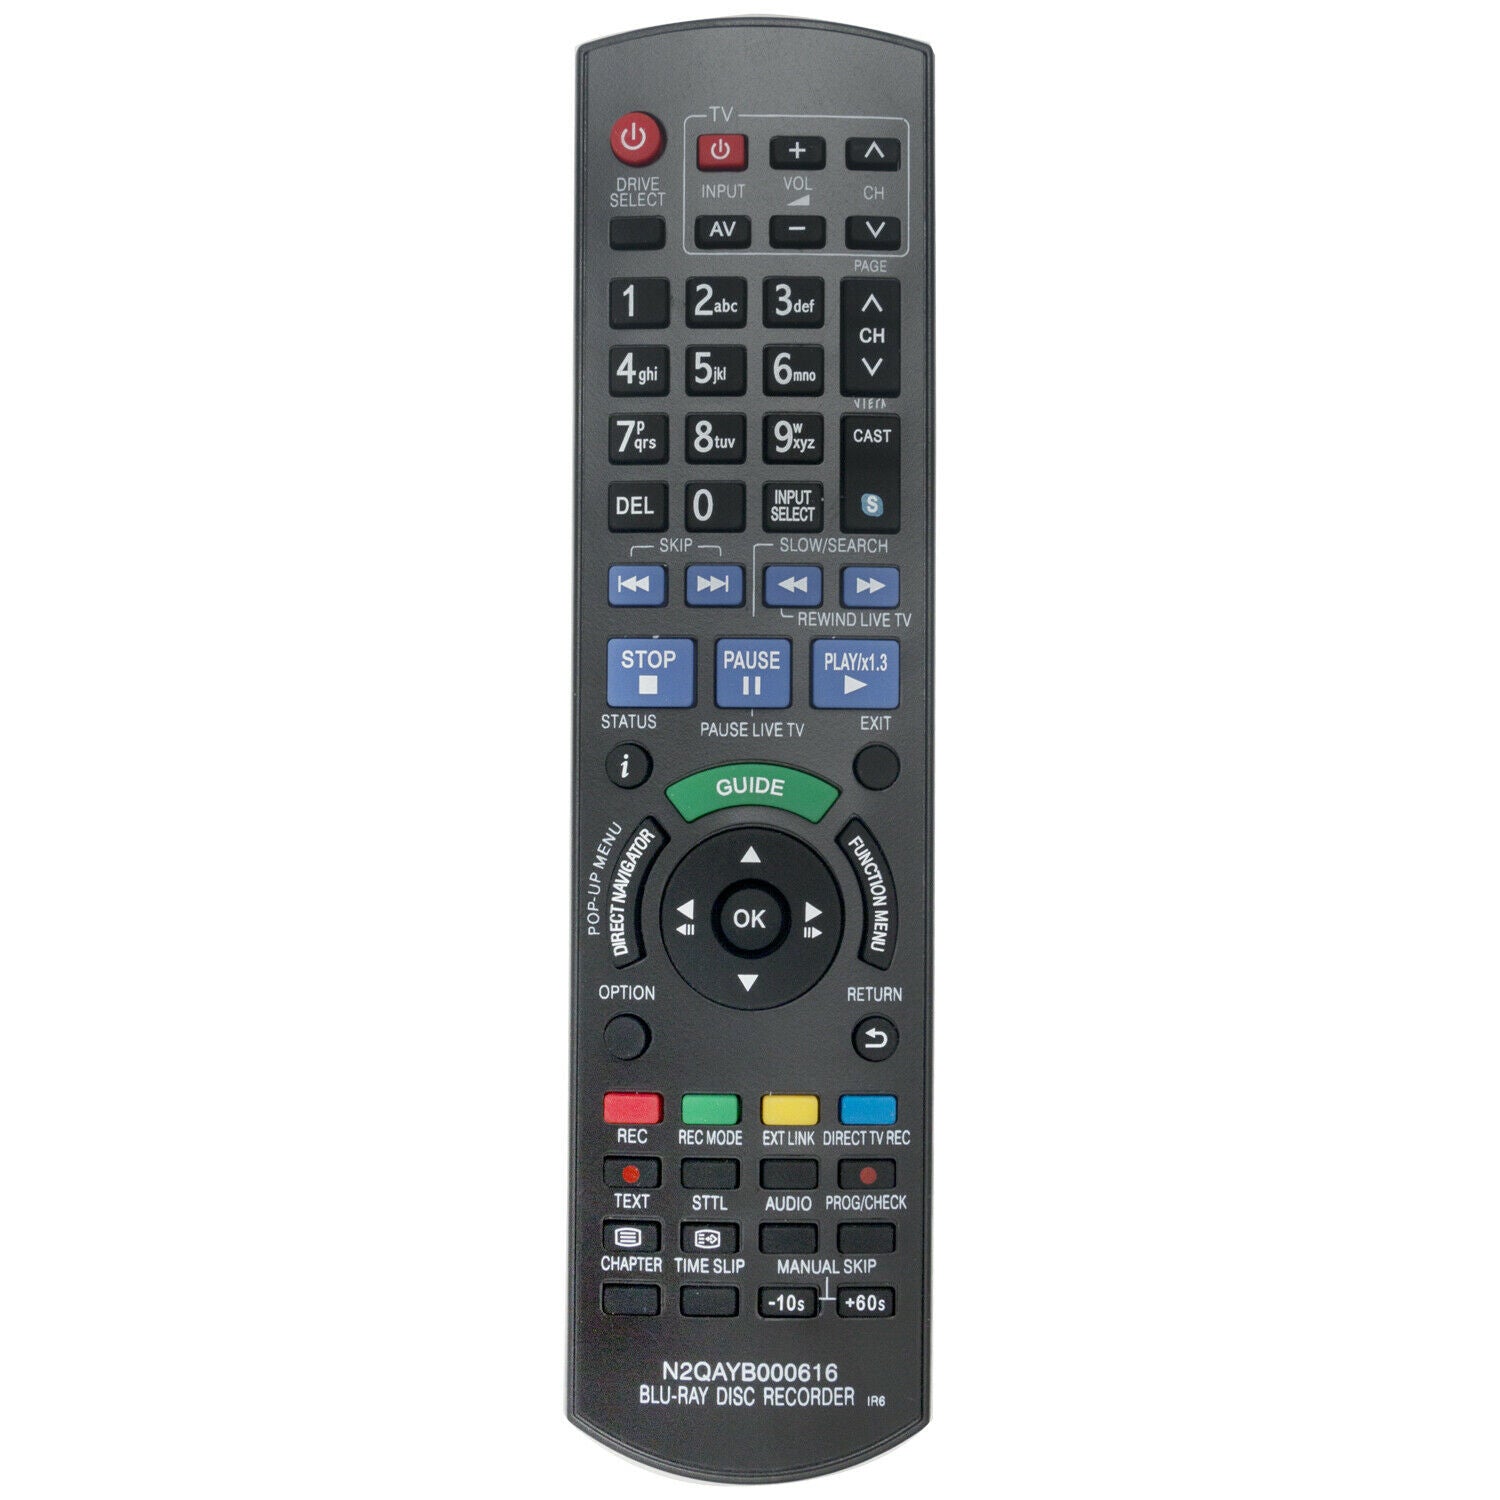 N2QAYB000616 Remote Replacement Only Fit for Panasonic BluRay Disc Recorder & Panasonic TV